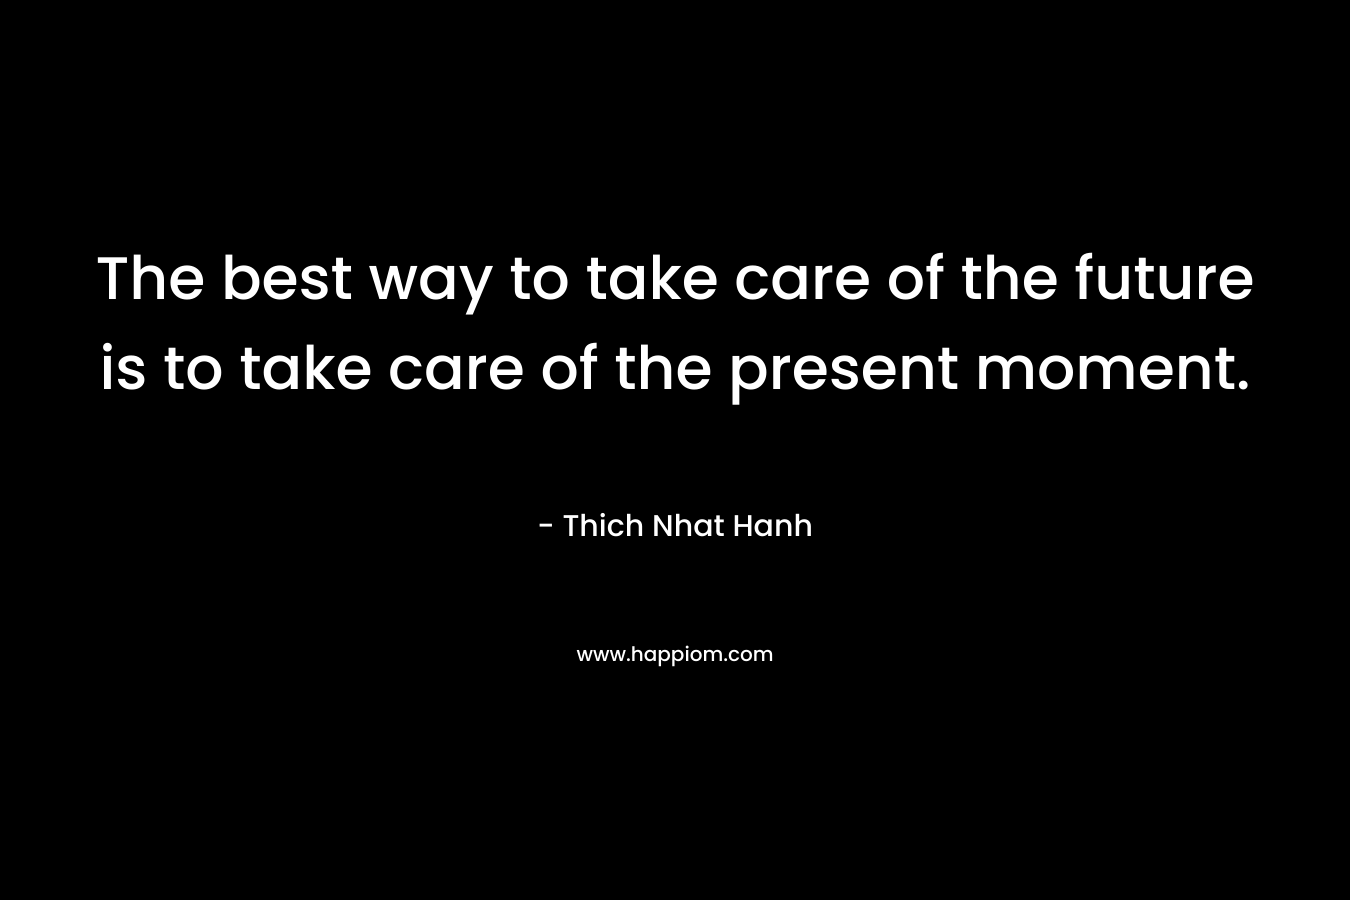 The best way to take care of the future is to take care of the present moment. – Thich Nhat Hanh